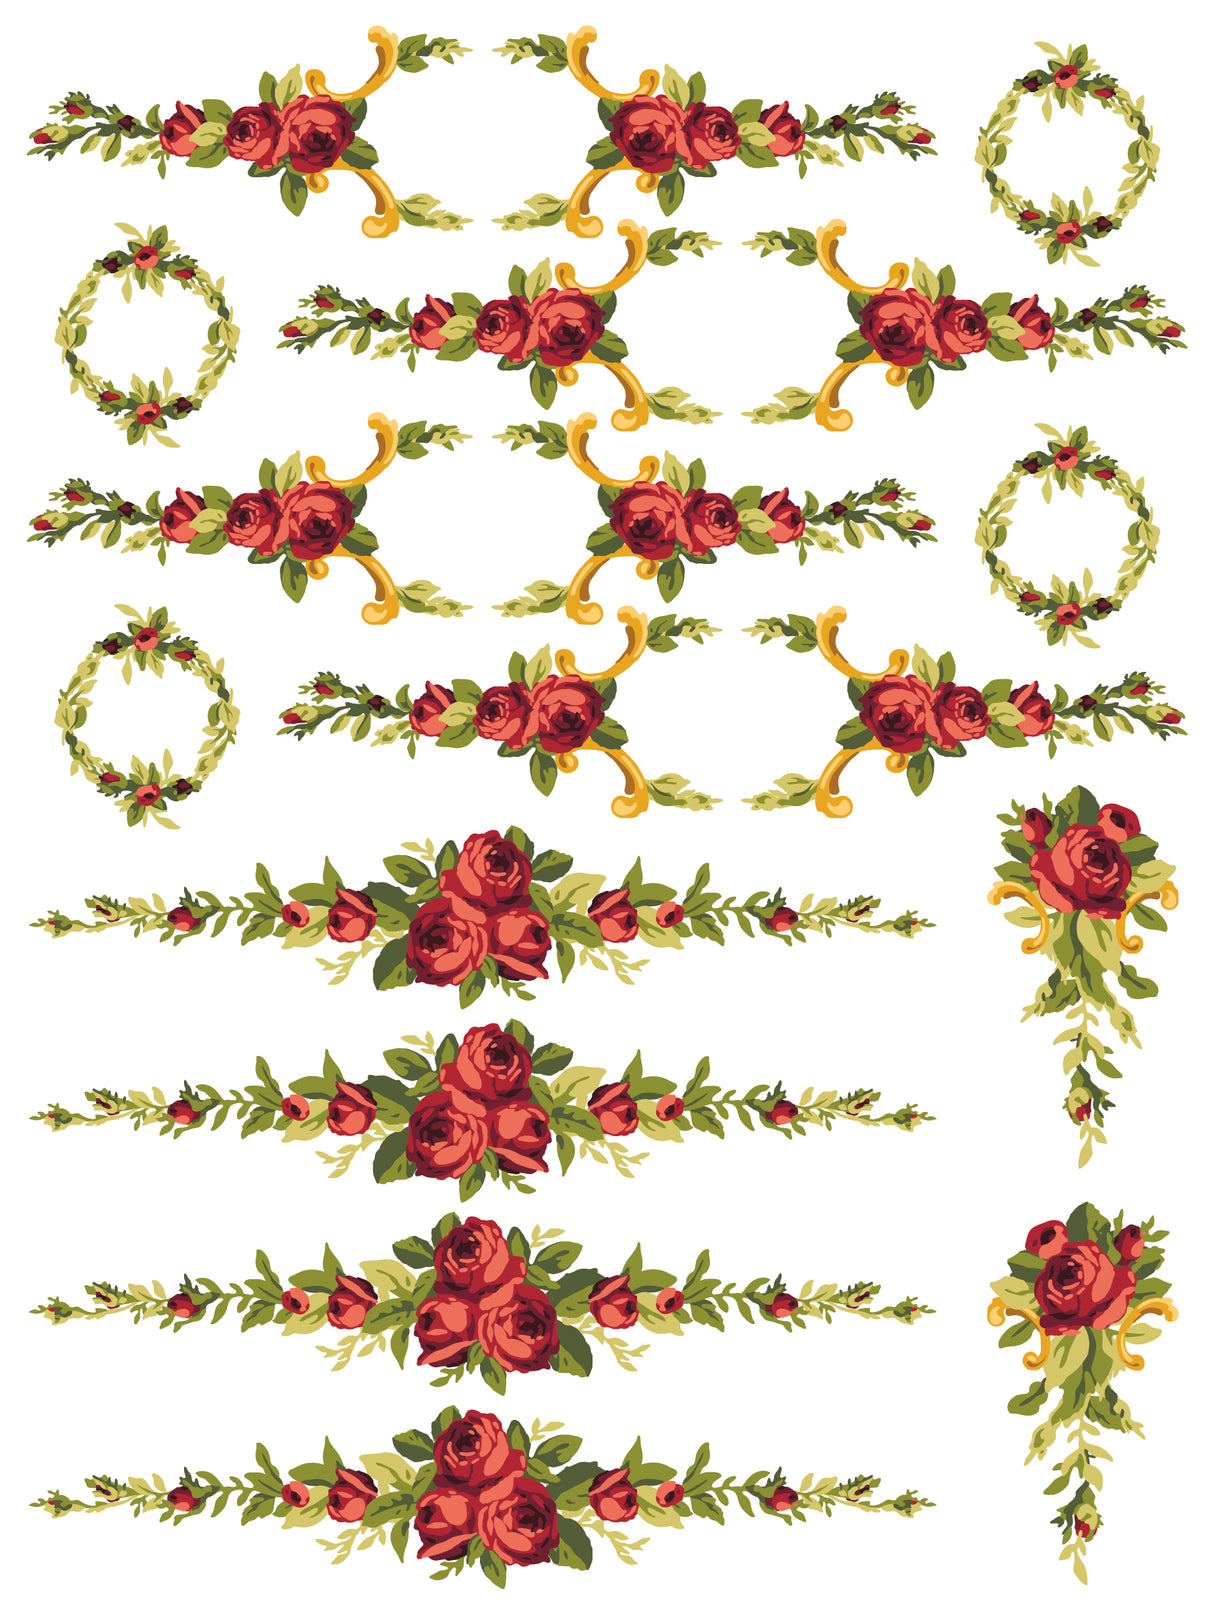 Petite Fleur Red Paint Inlay (Limited Release) by IOD - Iron Orchid Designs